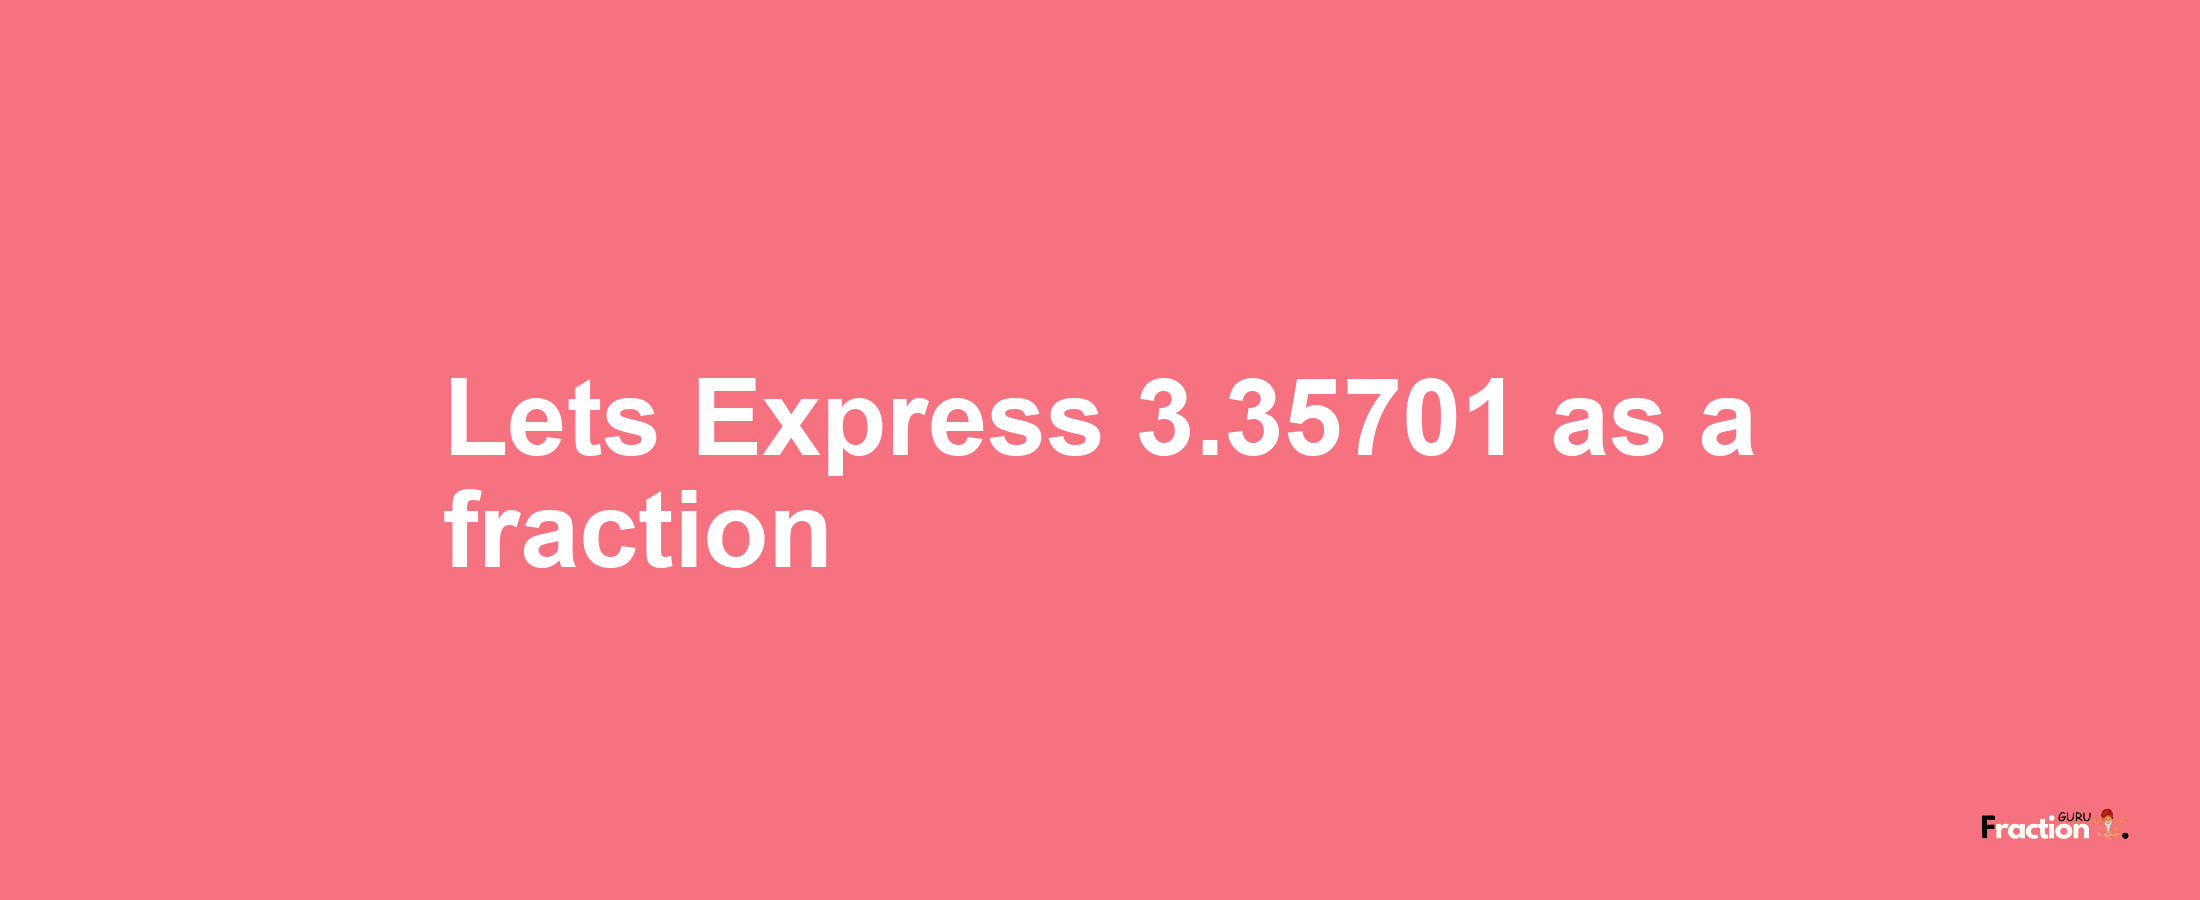 Lets Express 3.35701 as afraction